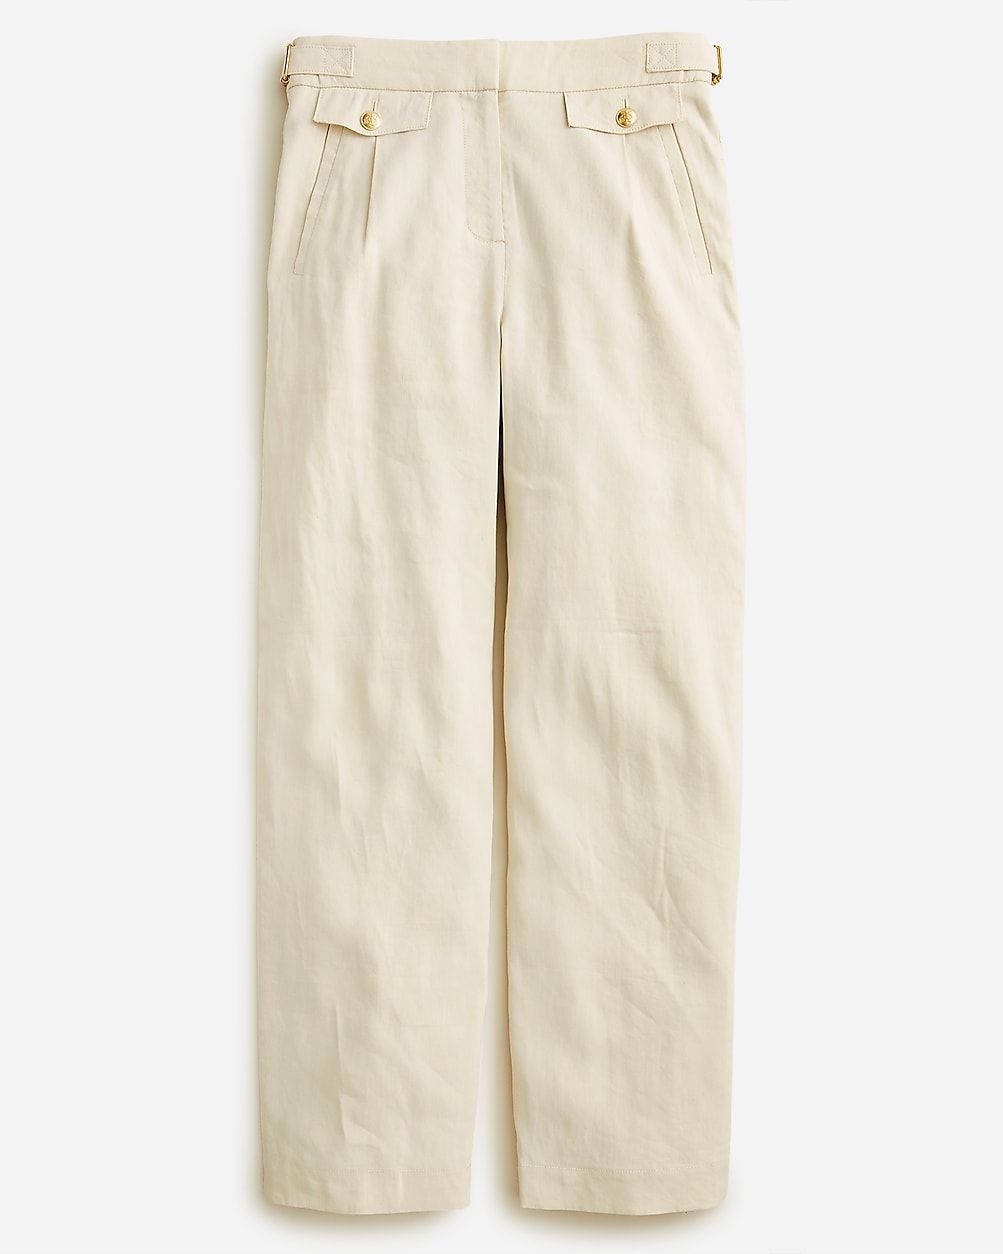 Collection side-tab trouser in Italian linen blend | J.Crew US